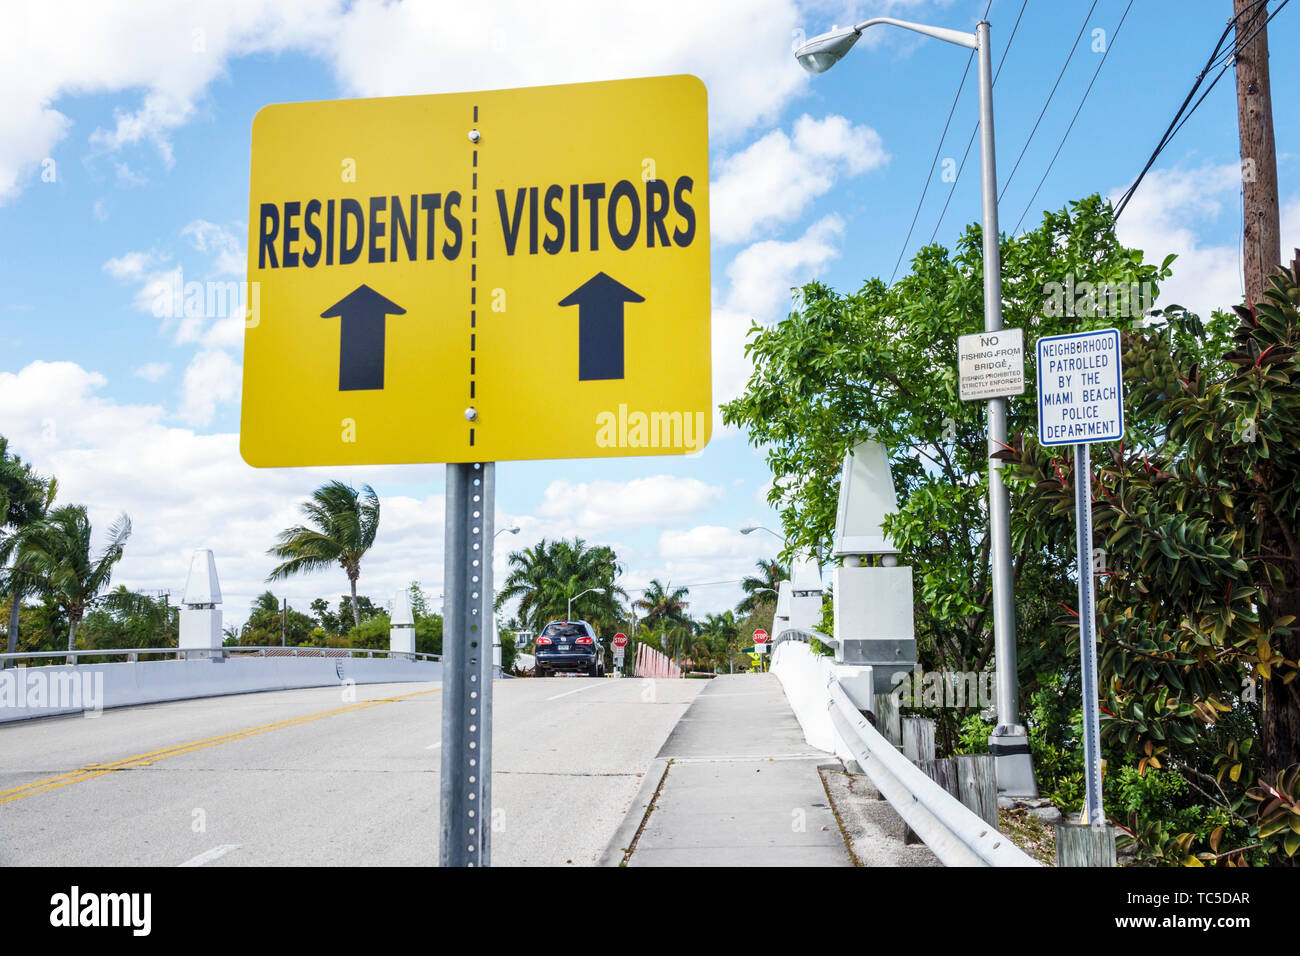 Miami Beach Florida,Normandy Shores,gated community,lane sign,residents visitors,security crime prevention,FL190331027 Stock Photo